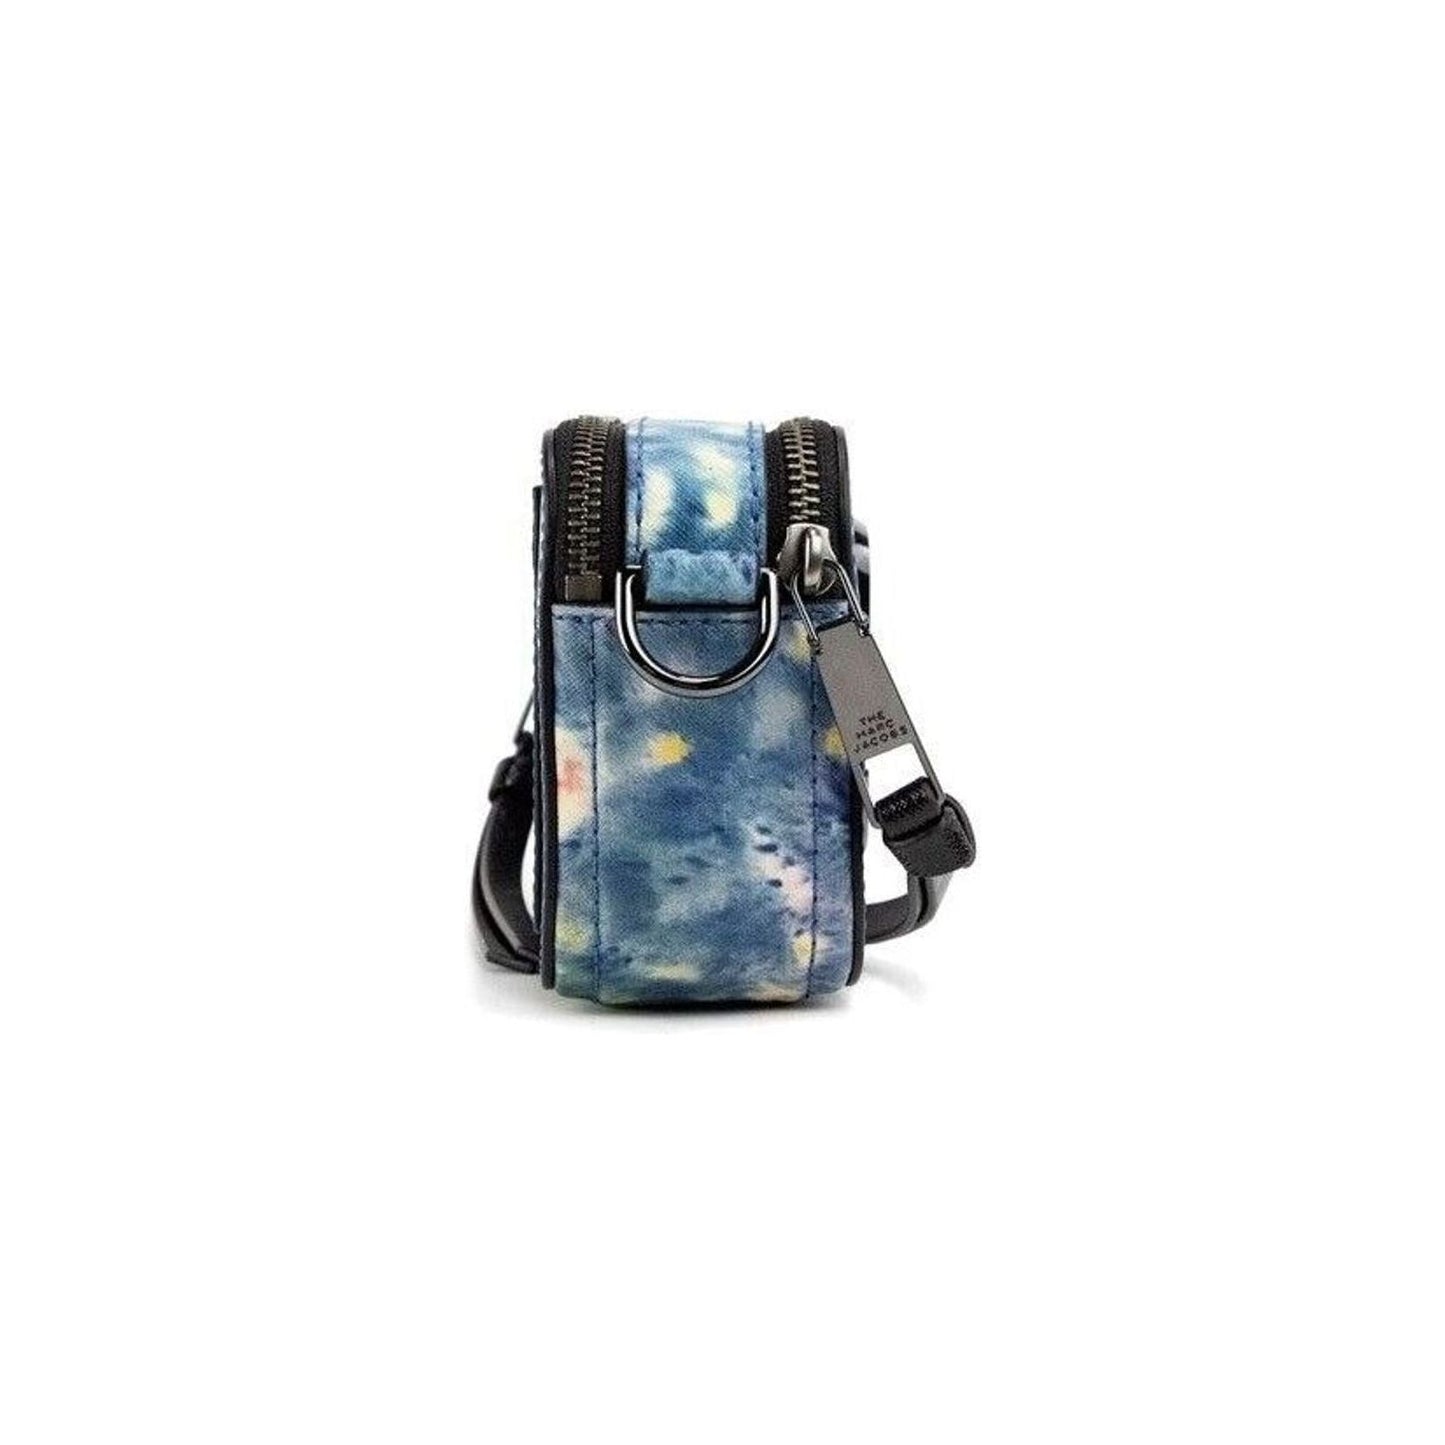 Marc Jacobs The Snapshot bag Watercolor Blue Printed Leather Shoulder Bag Purse the-snapshot-bag-watercolor-blue-printed-leather-shoulder-bag-purse